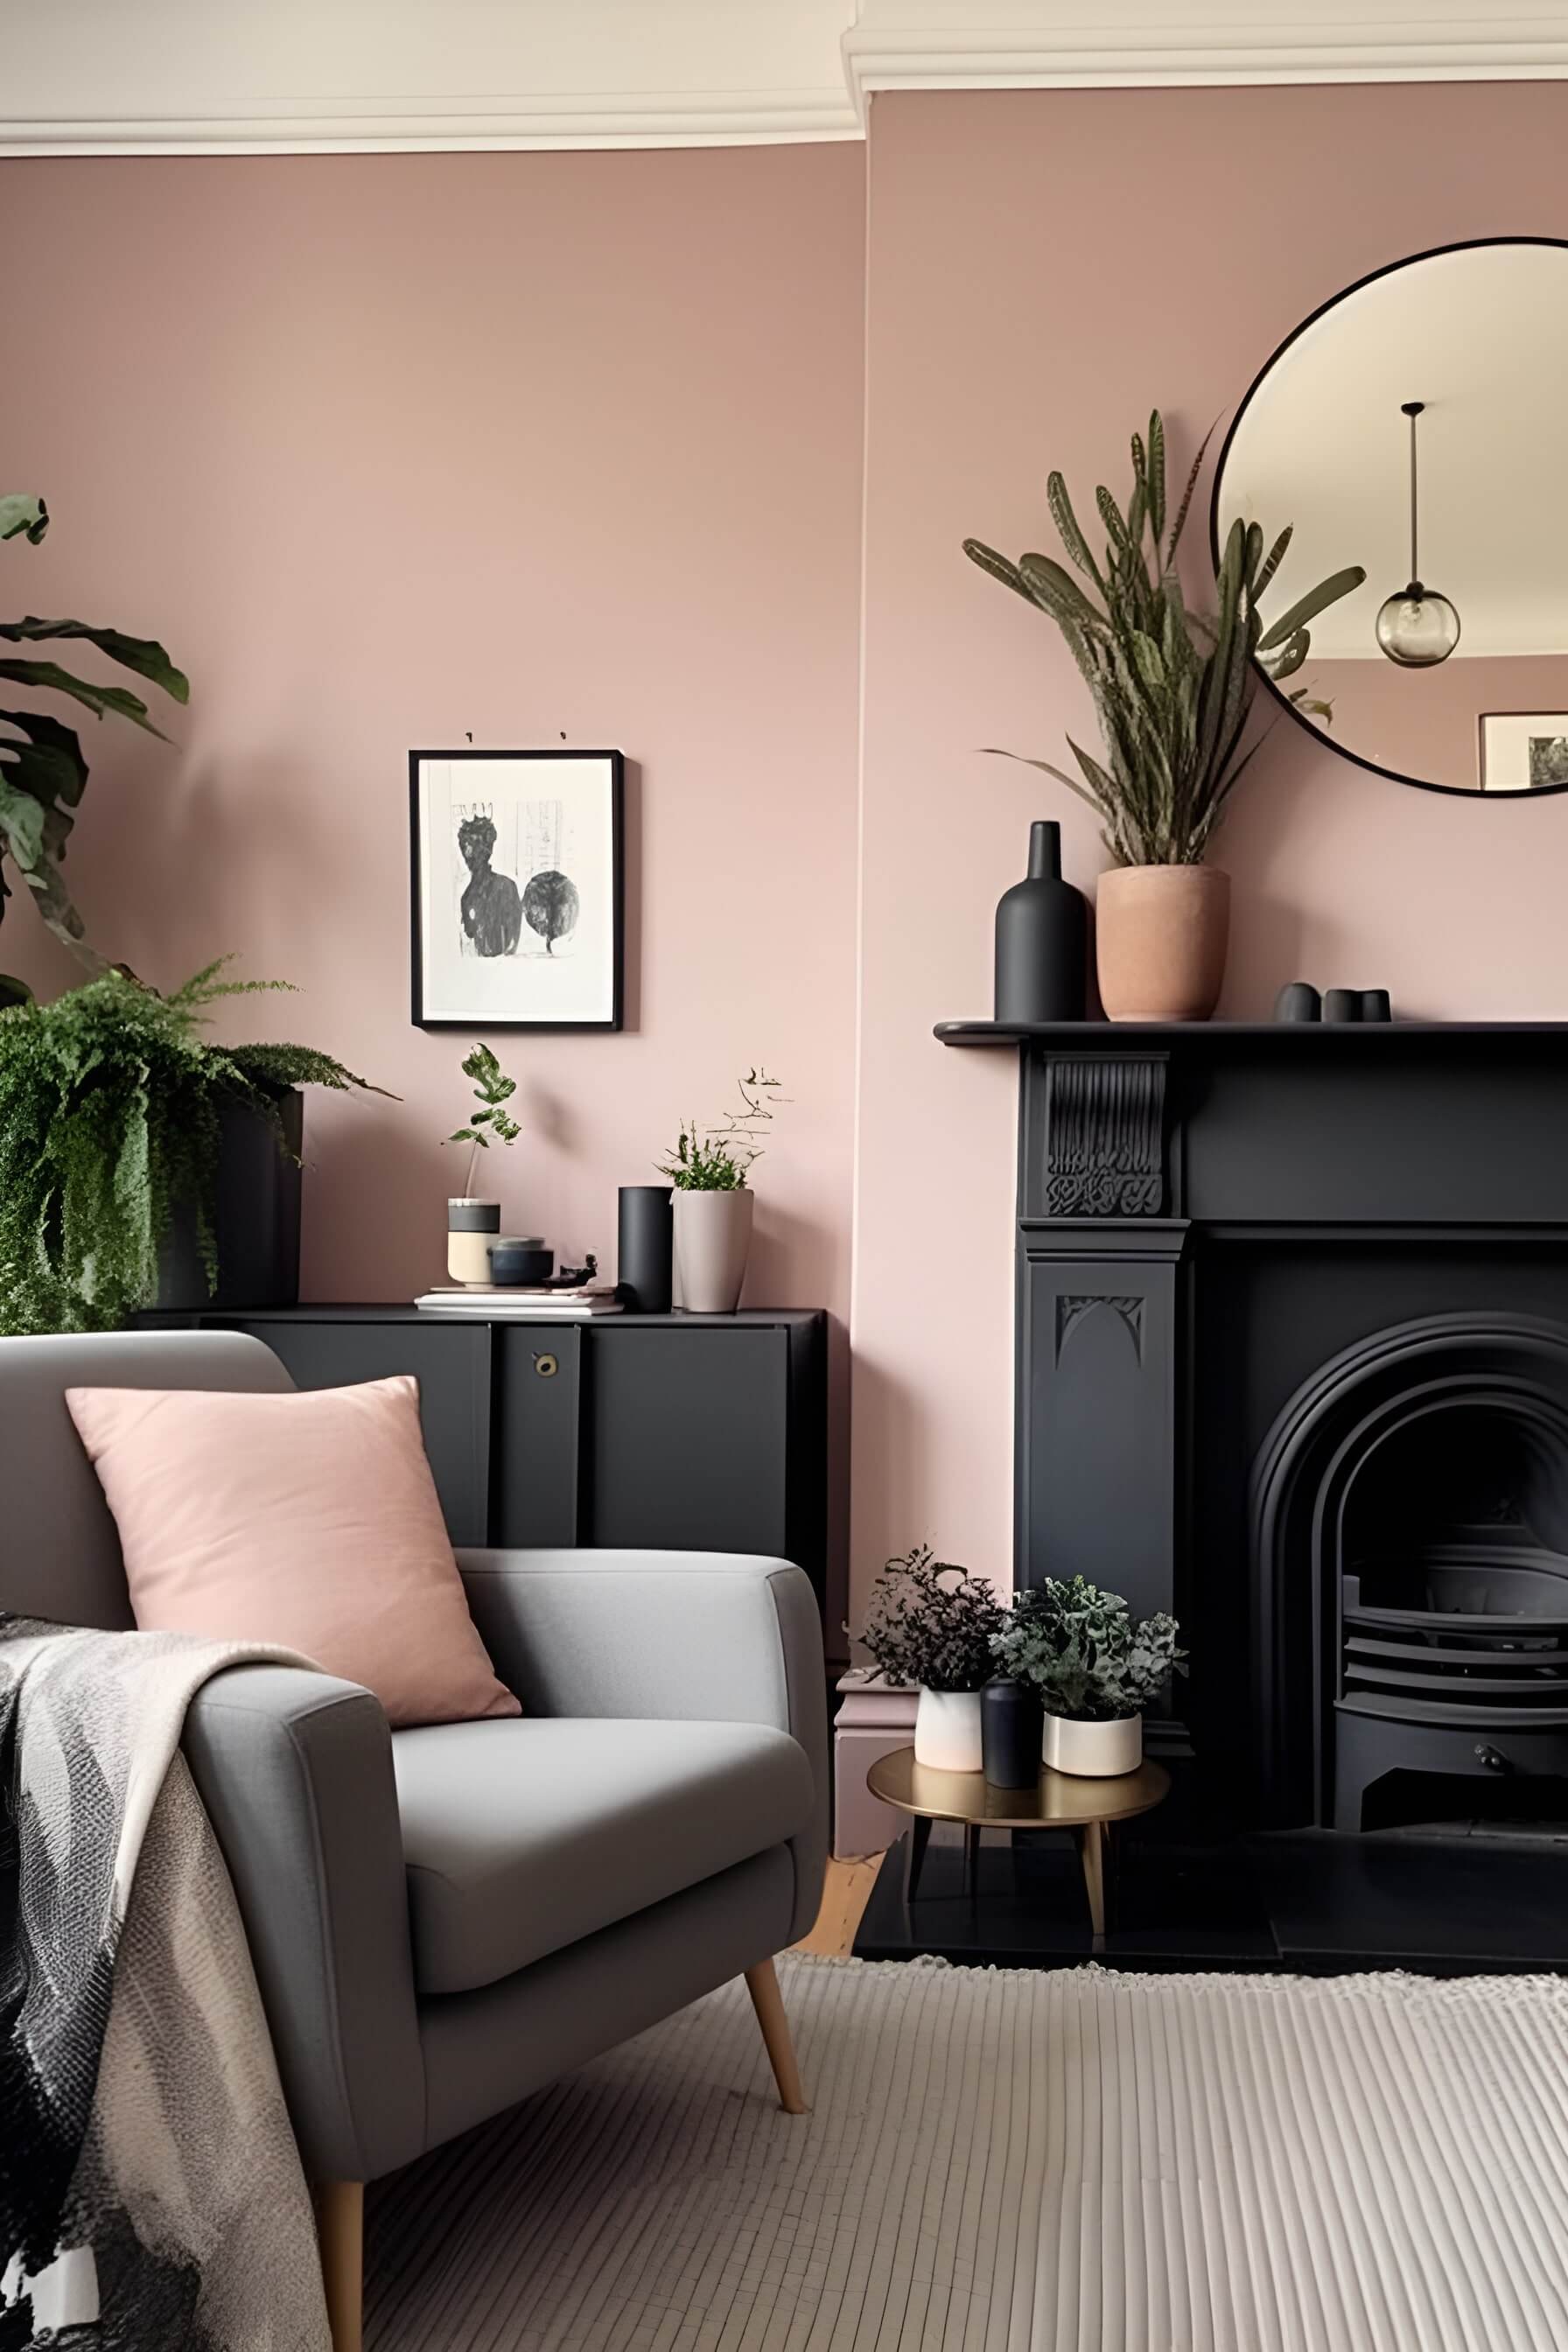 Neutral living room with blush pink walls, black fireplace, black sideboard, plants, blush pink accessories, and gray armchair